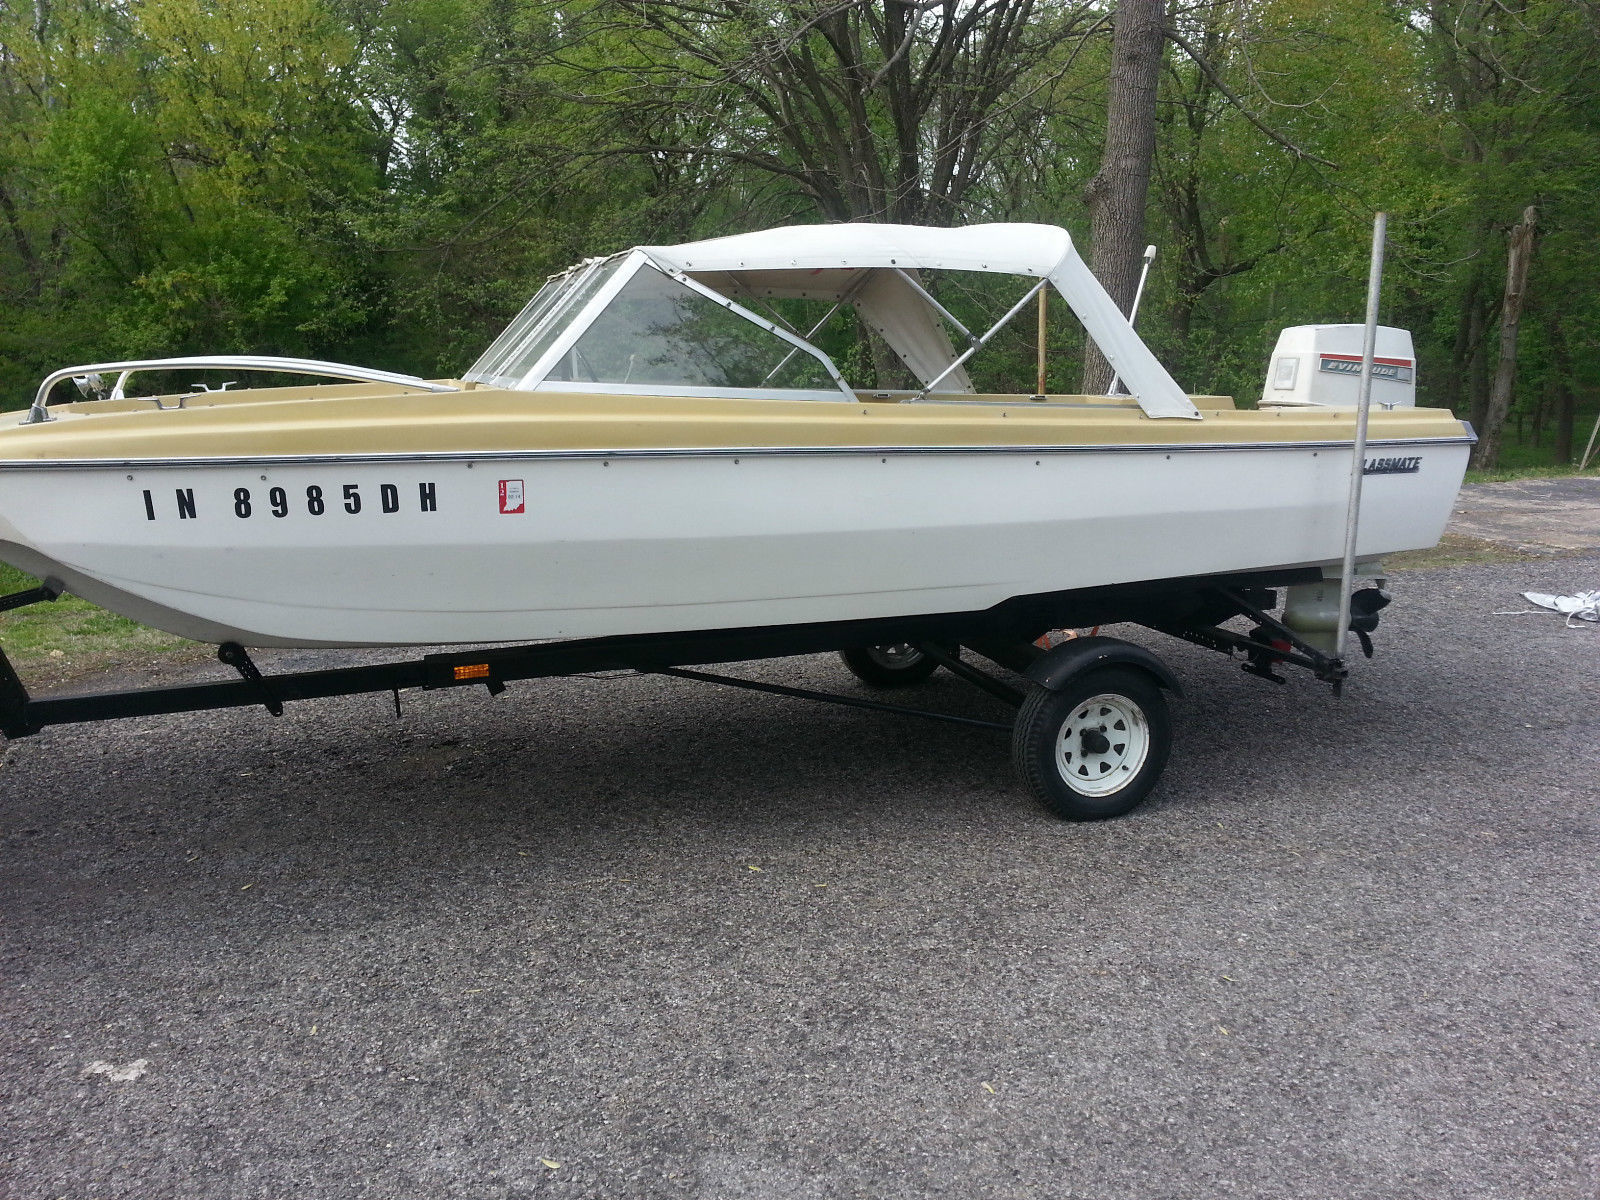 Glassmate 1969 for sale for $2,000 - Boats-from-USA.com